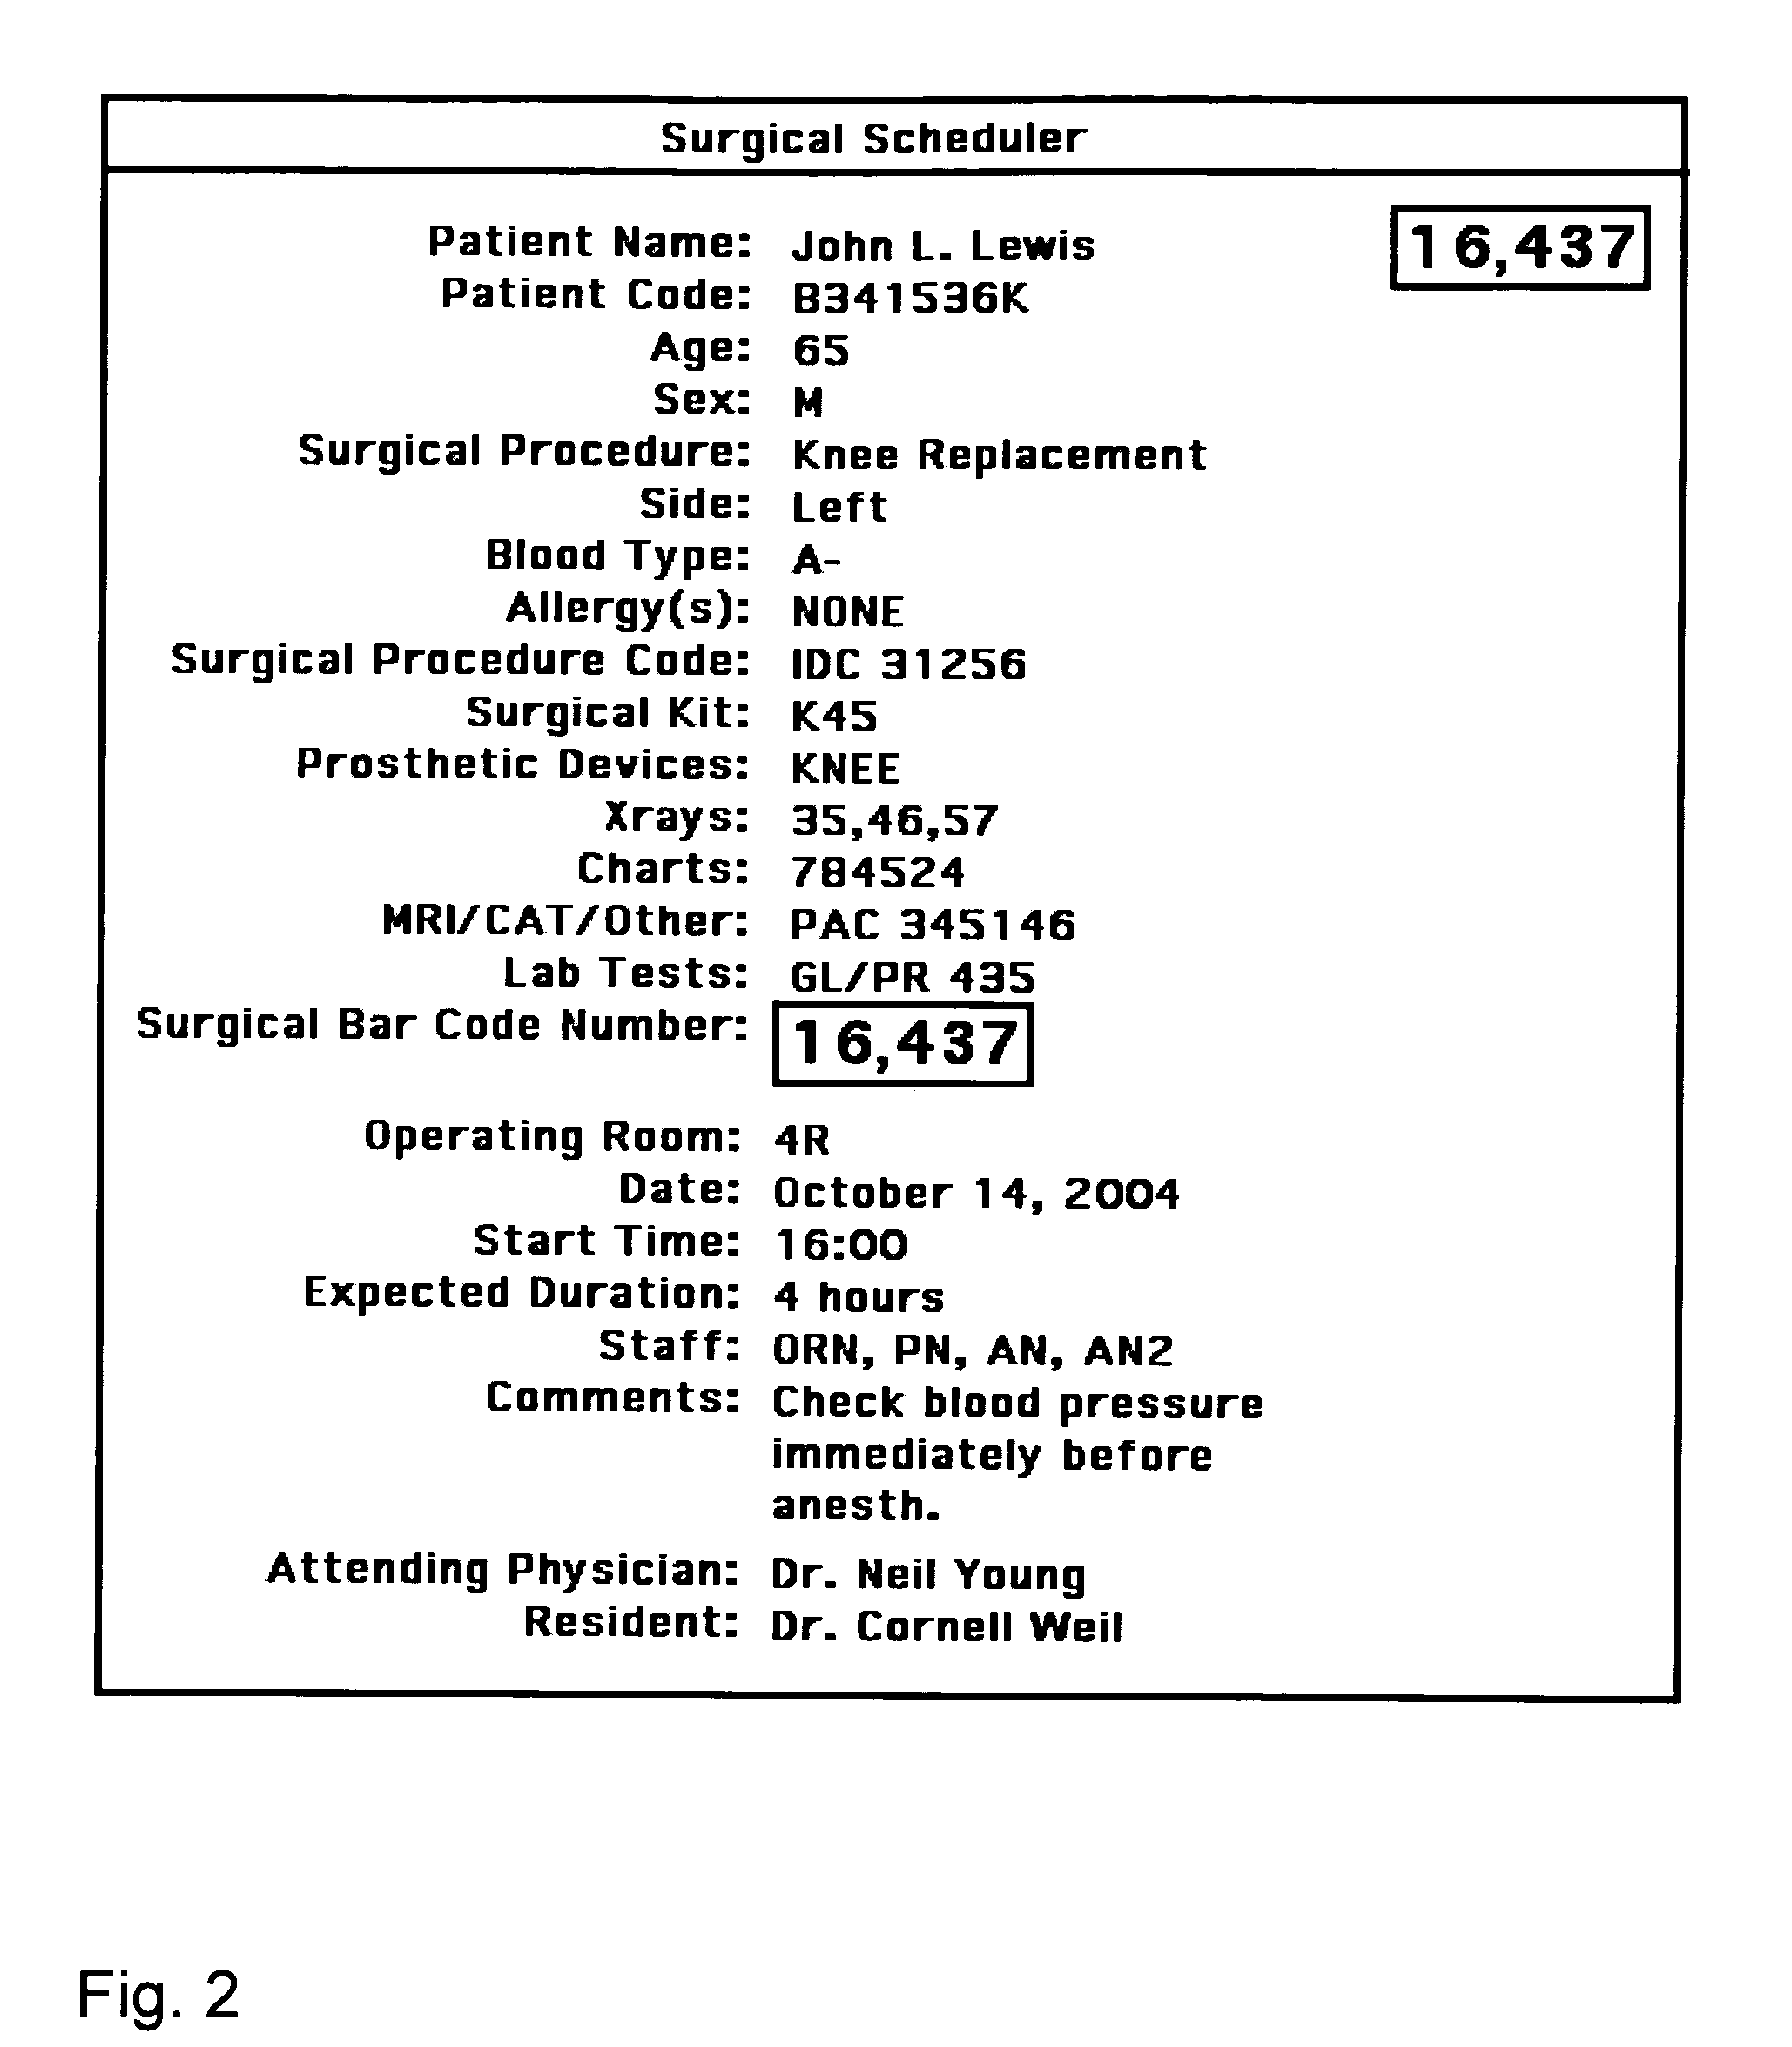 System and method of utilizing a machine readable medical marking for managing surgical procedures